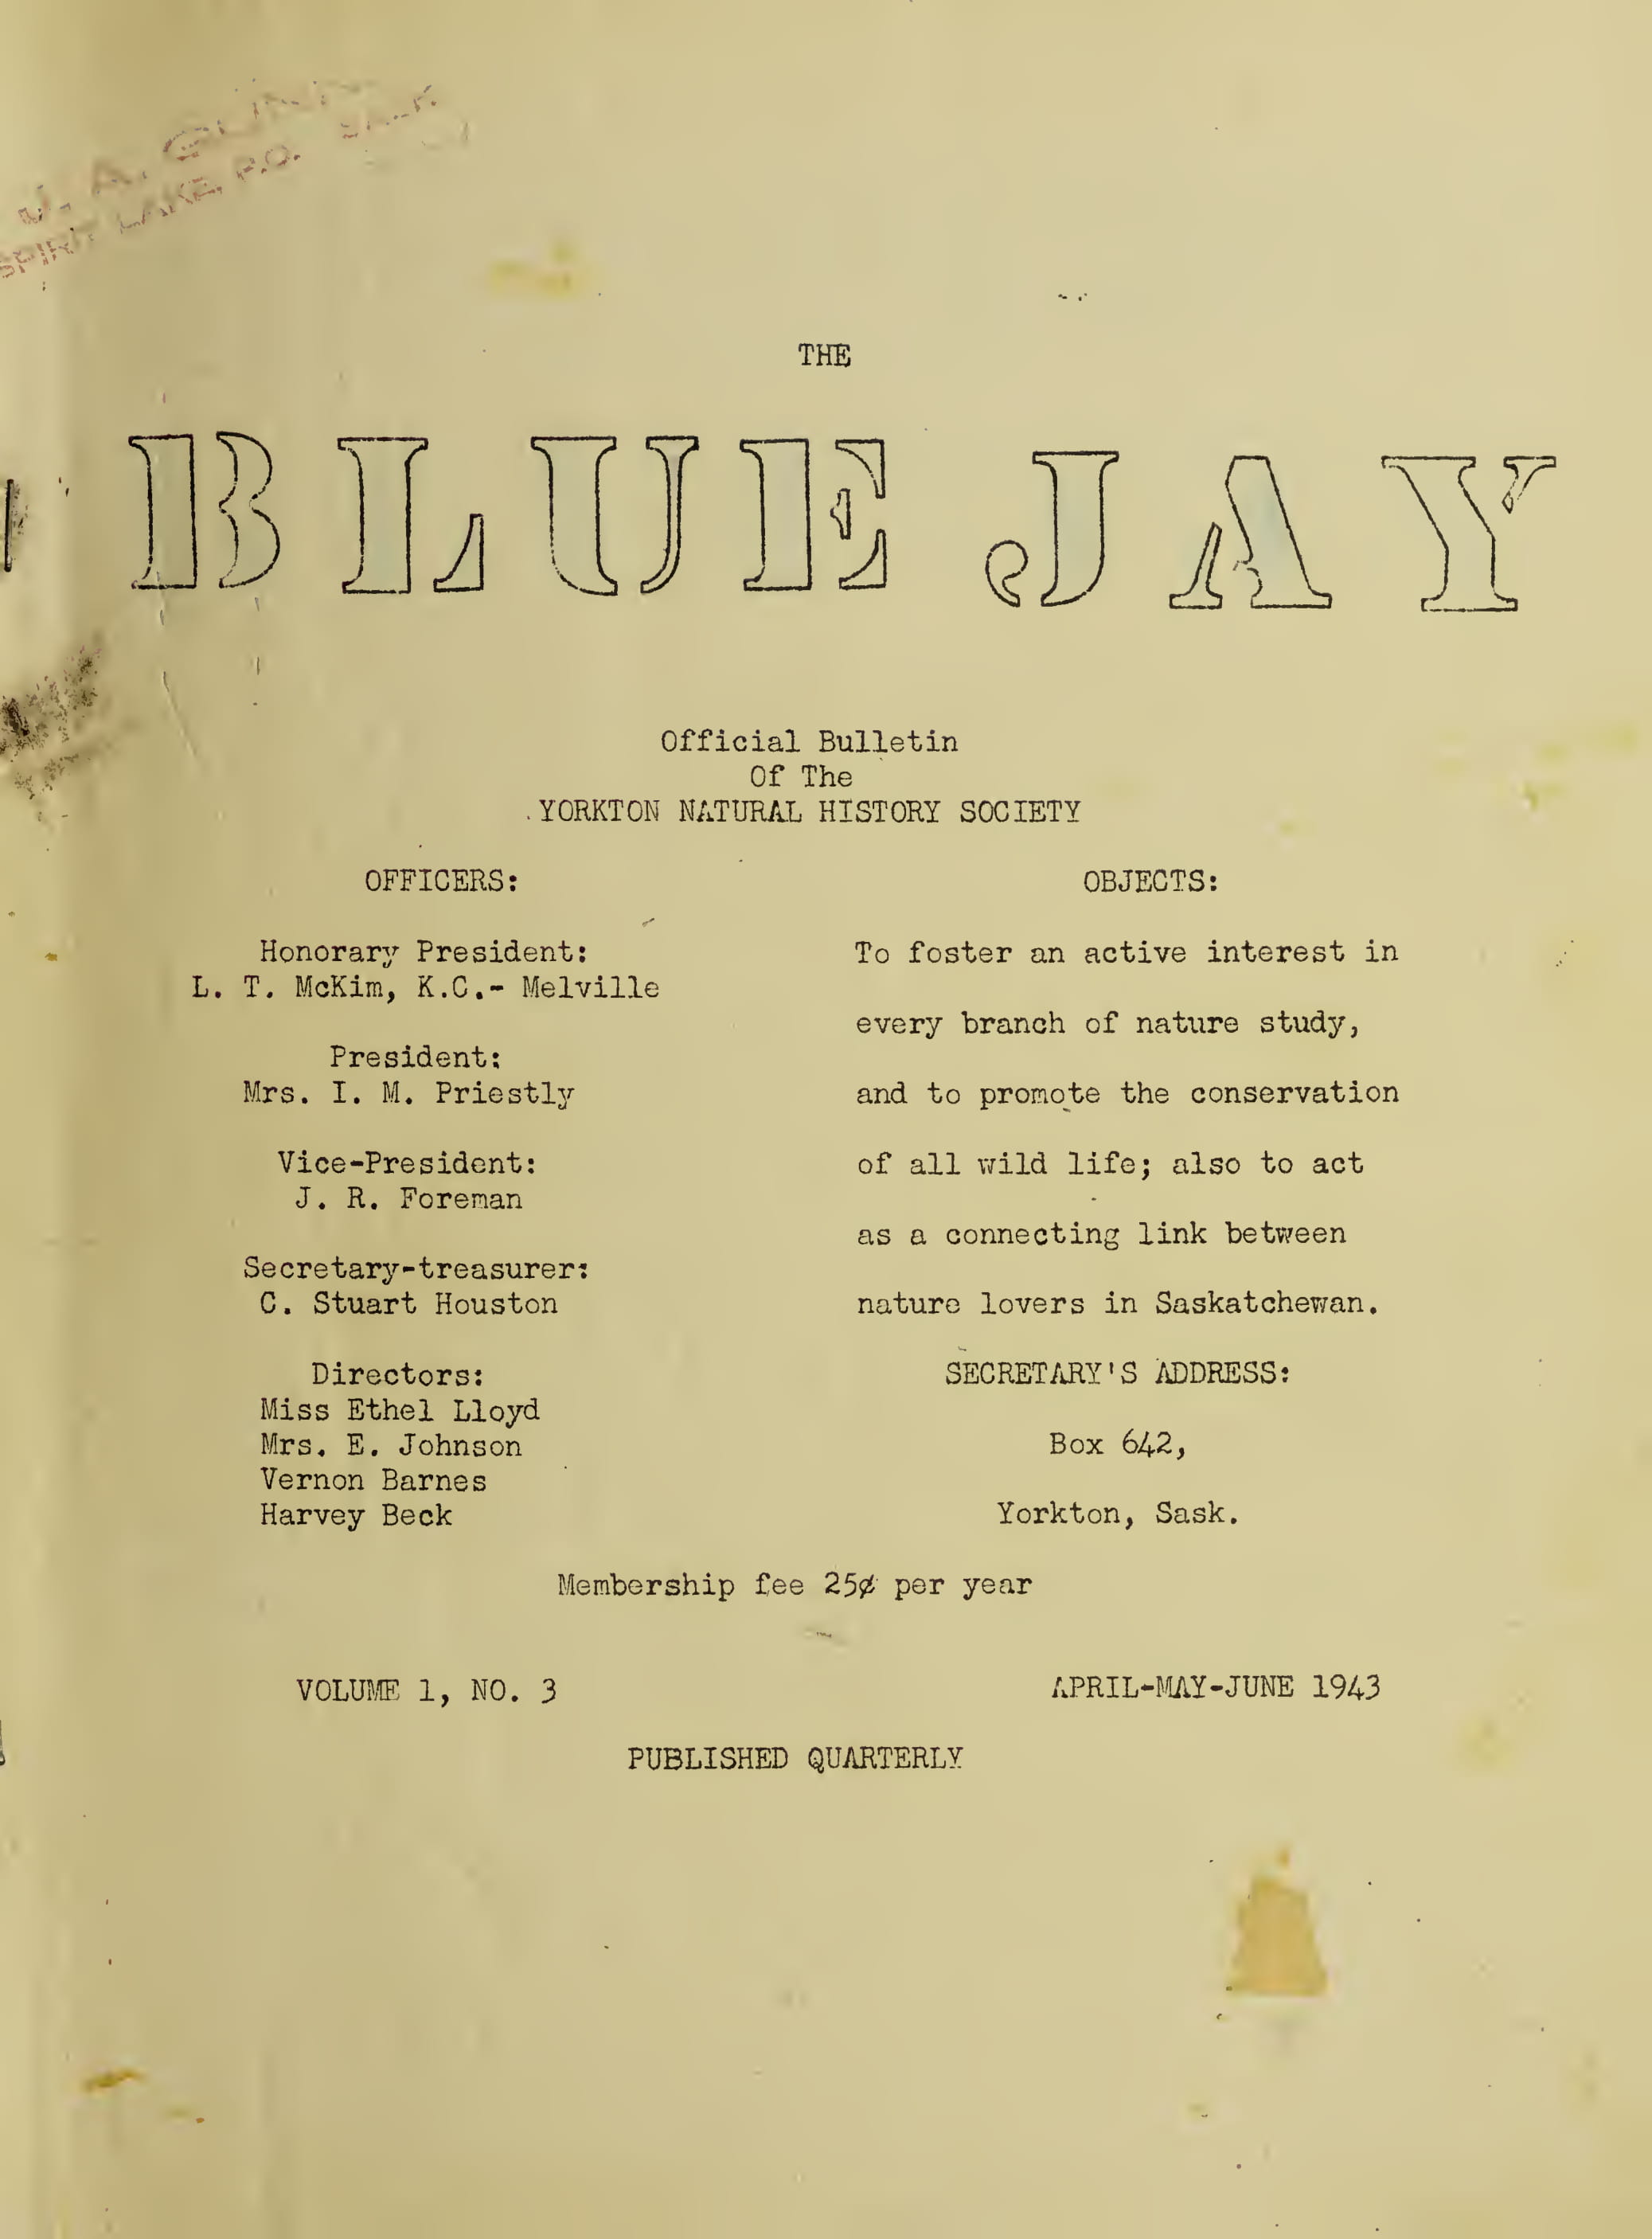 Cover Image for Spring 1943